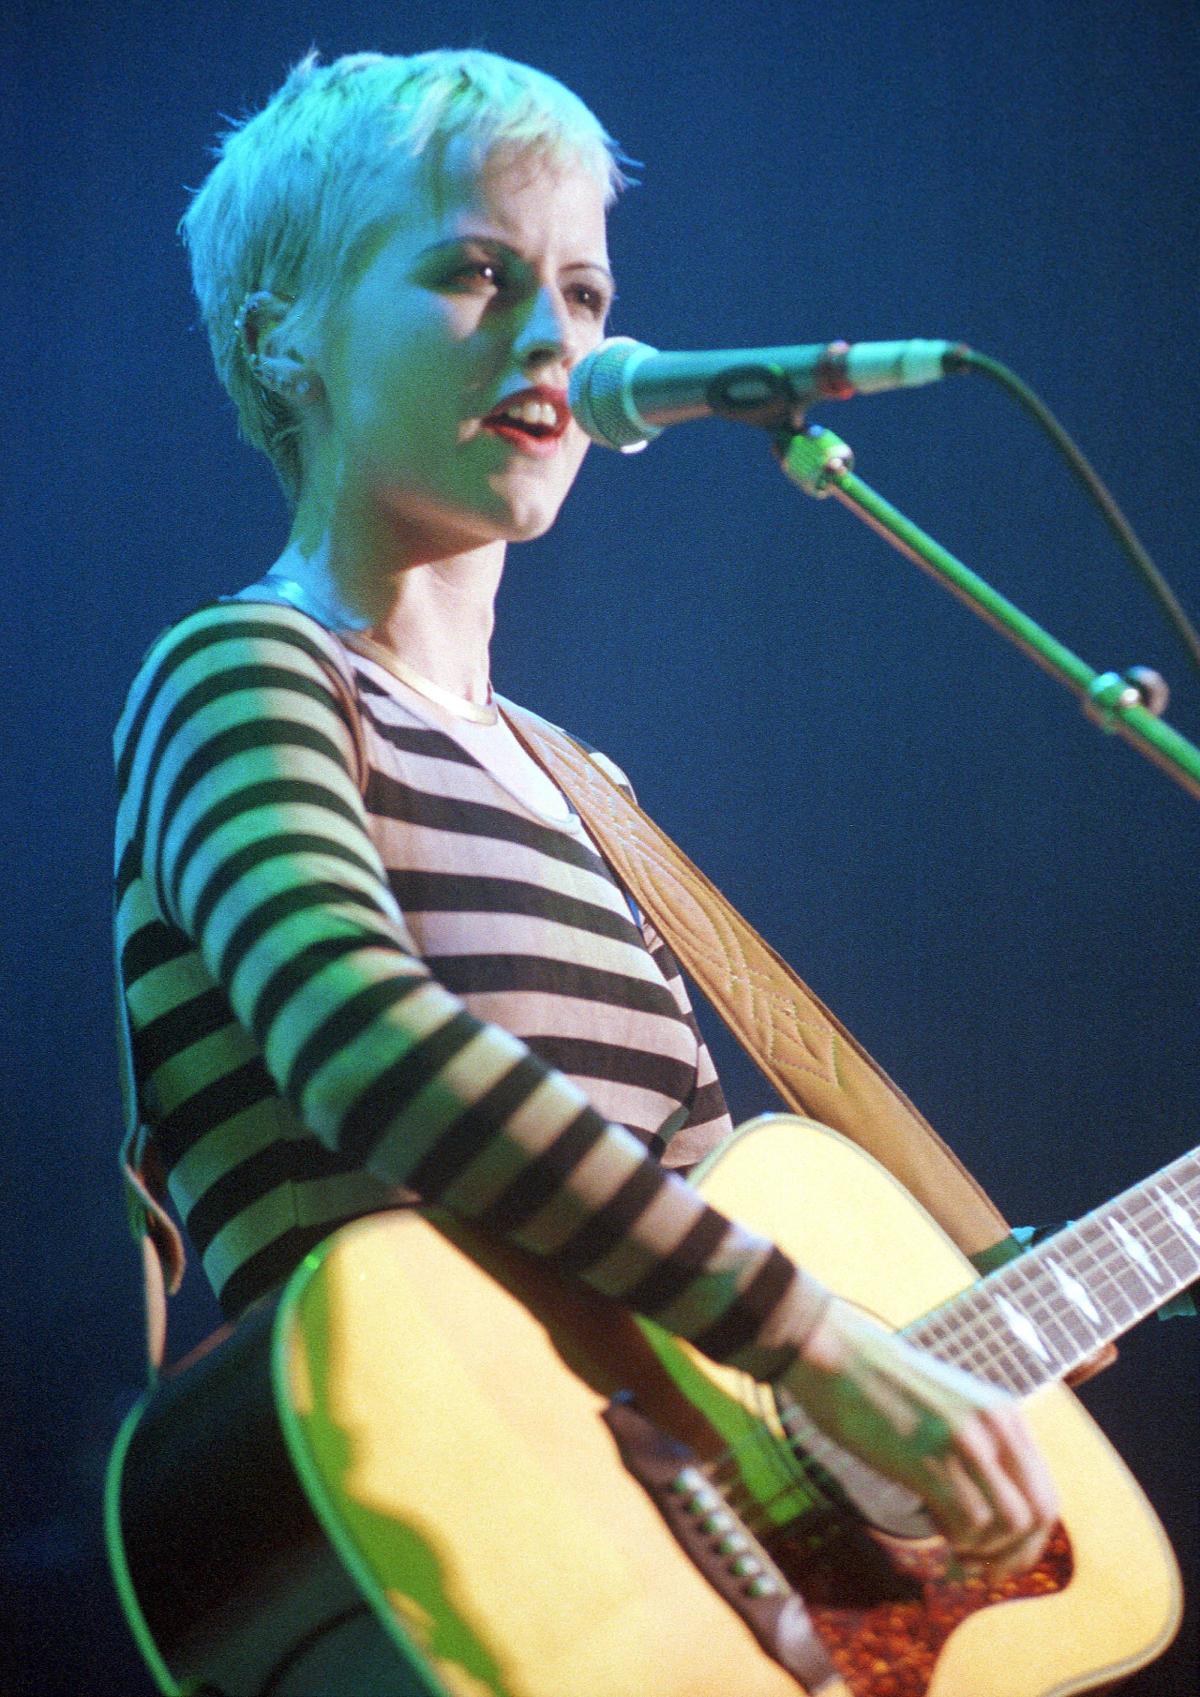 Dolores O'Riordan at the beginning of her journey...